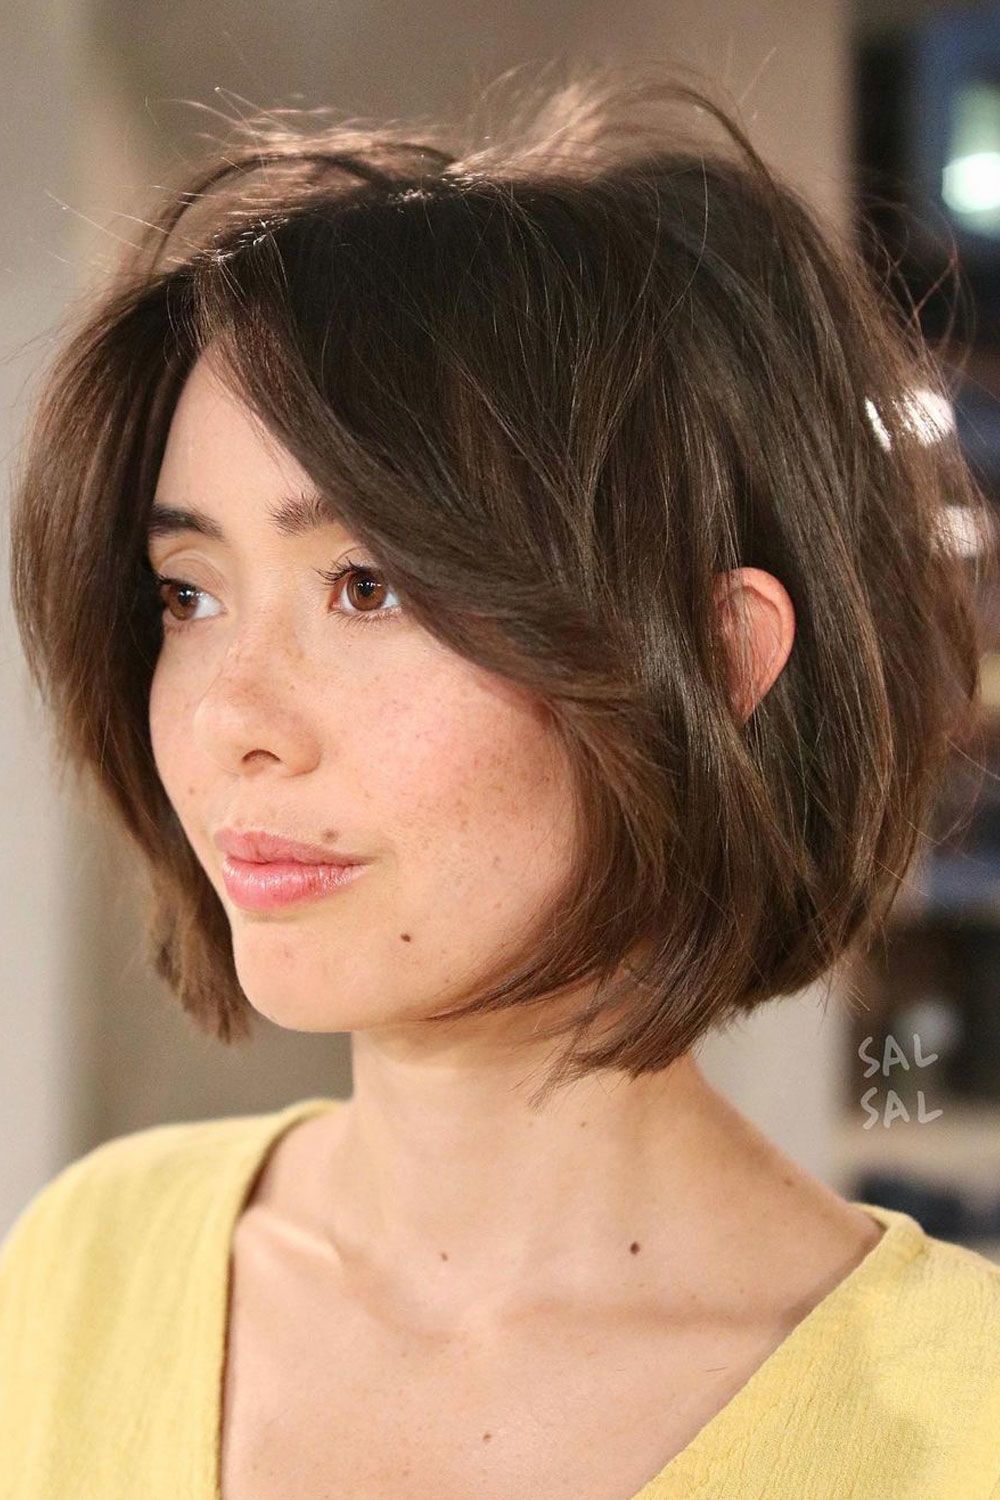 Short hair for Oval face 47 Haircut for oval face female Indian | Low maintenance short hair for oval face | Oval shape face hairstyle female Short Hairstyles for Oval Face Women